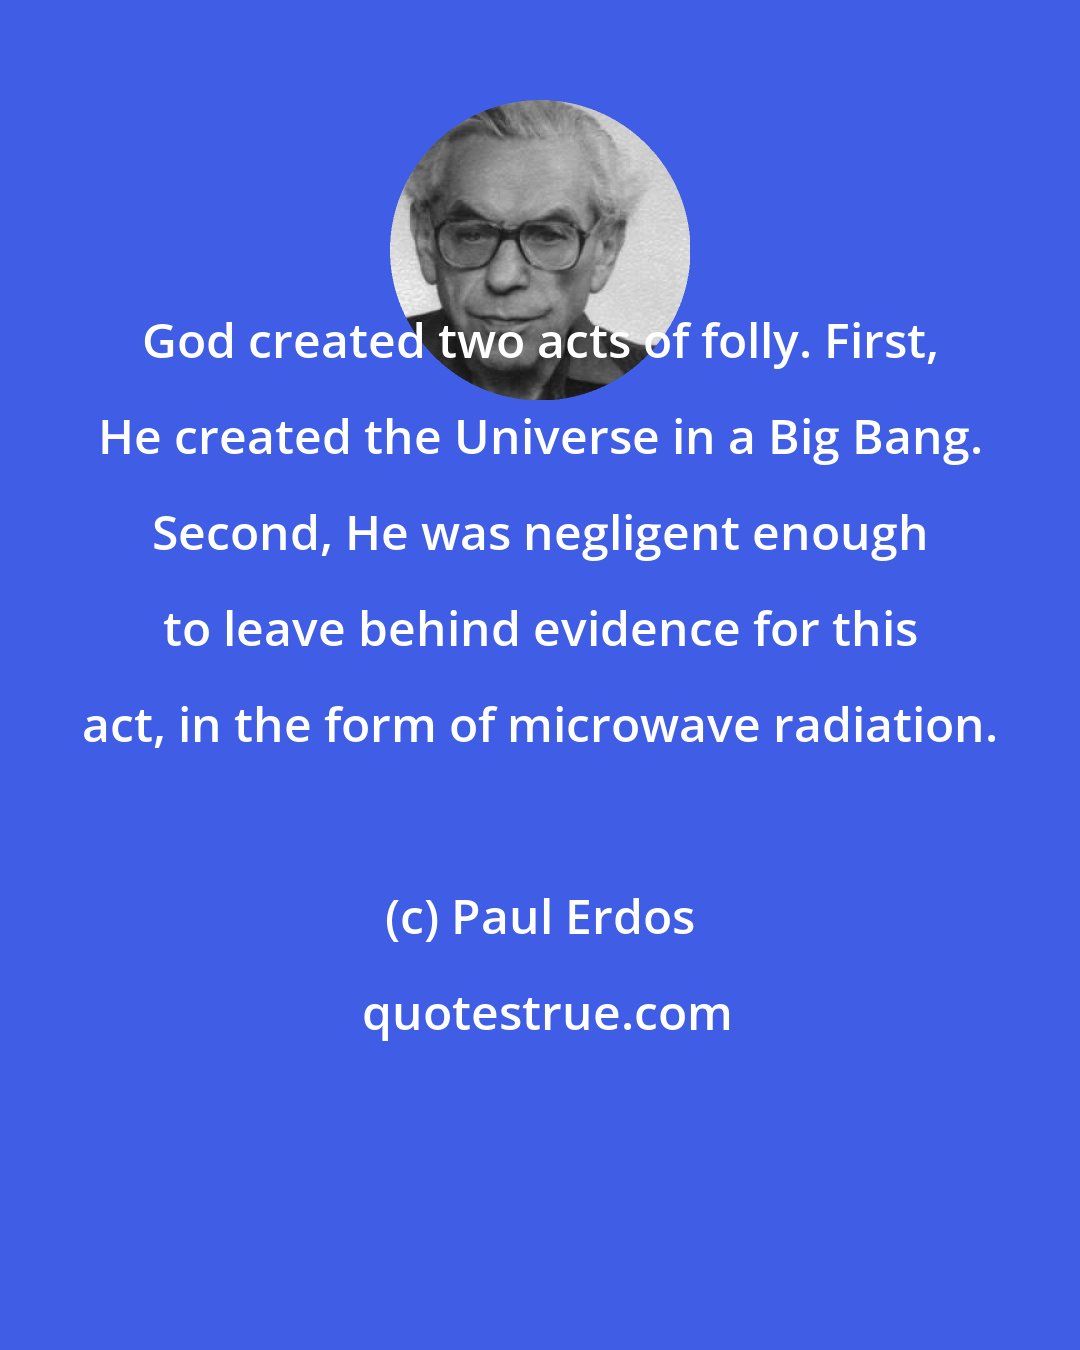 Paul Erdos: God created two acts of folly. First, He created the Universe in a Big Bang. Second, He was negligent enough to leave behind evidence for this act, in the form of microwave radiation.